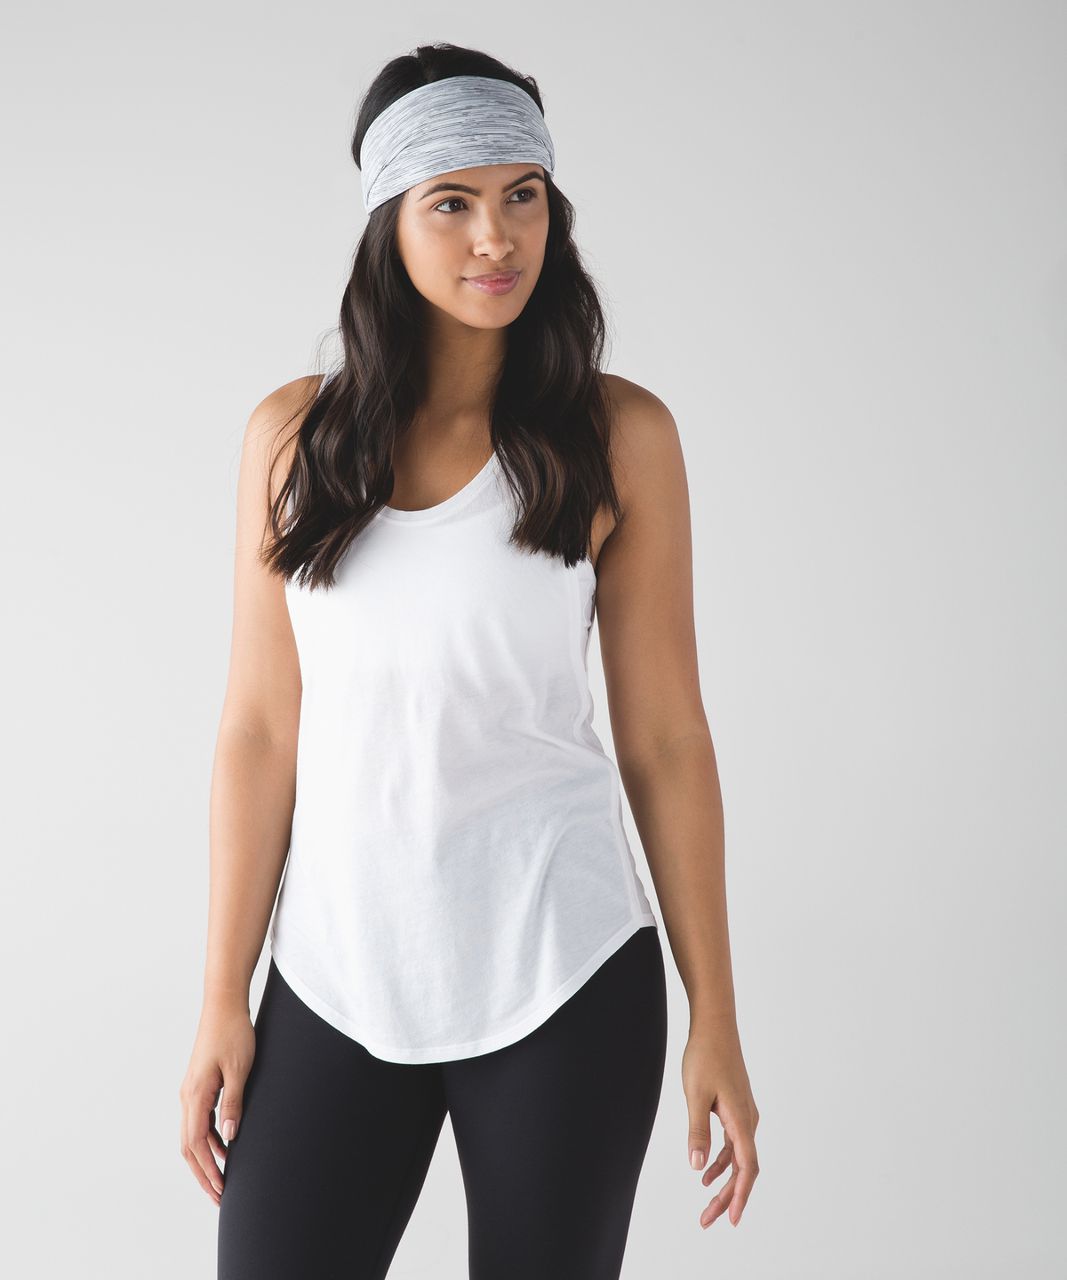 Lululemon Fringe Fighter Headband - Wee Are From Space Ice Grey Alpine White / Tiger Space Dye Black White